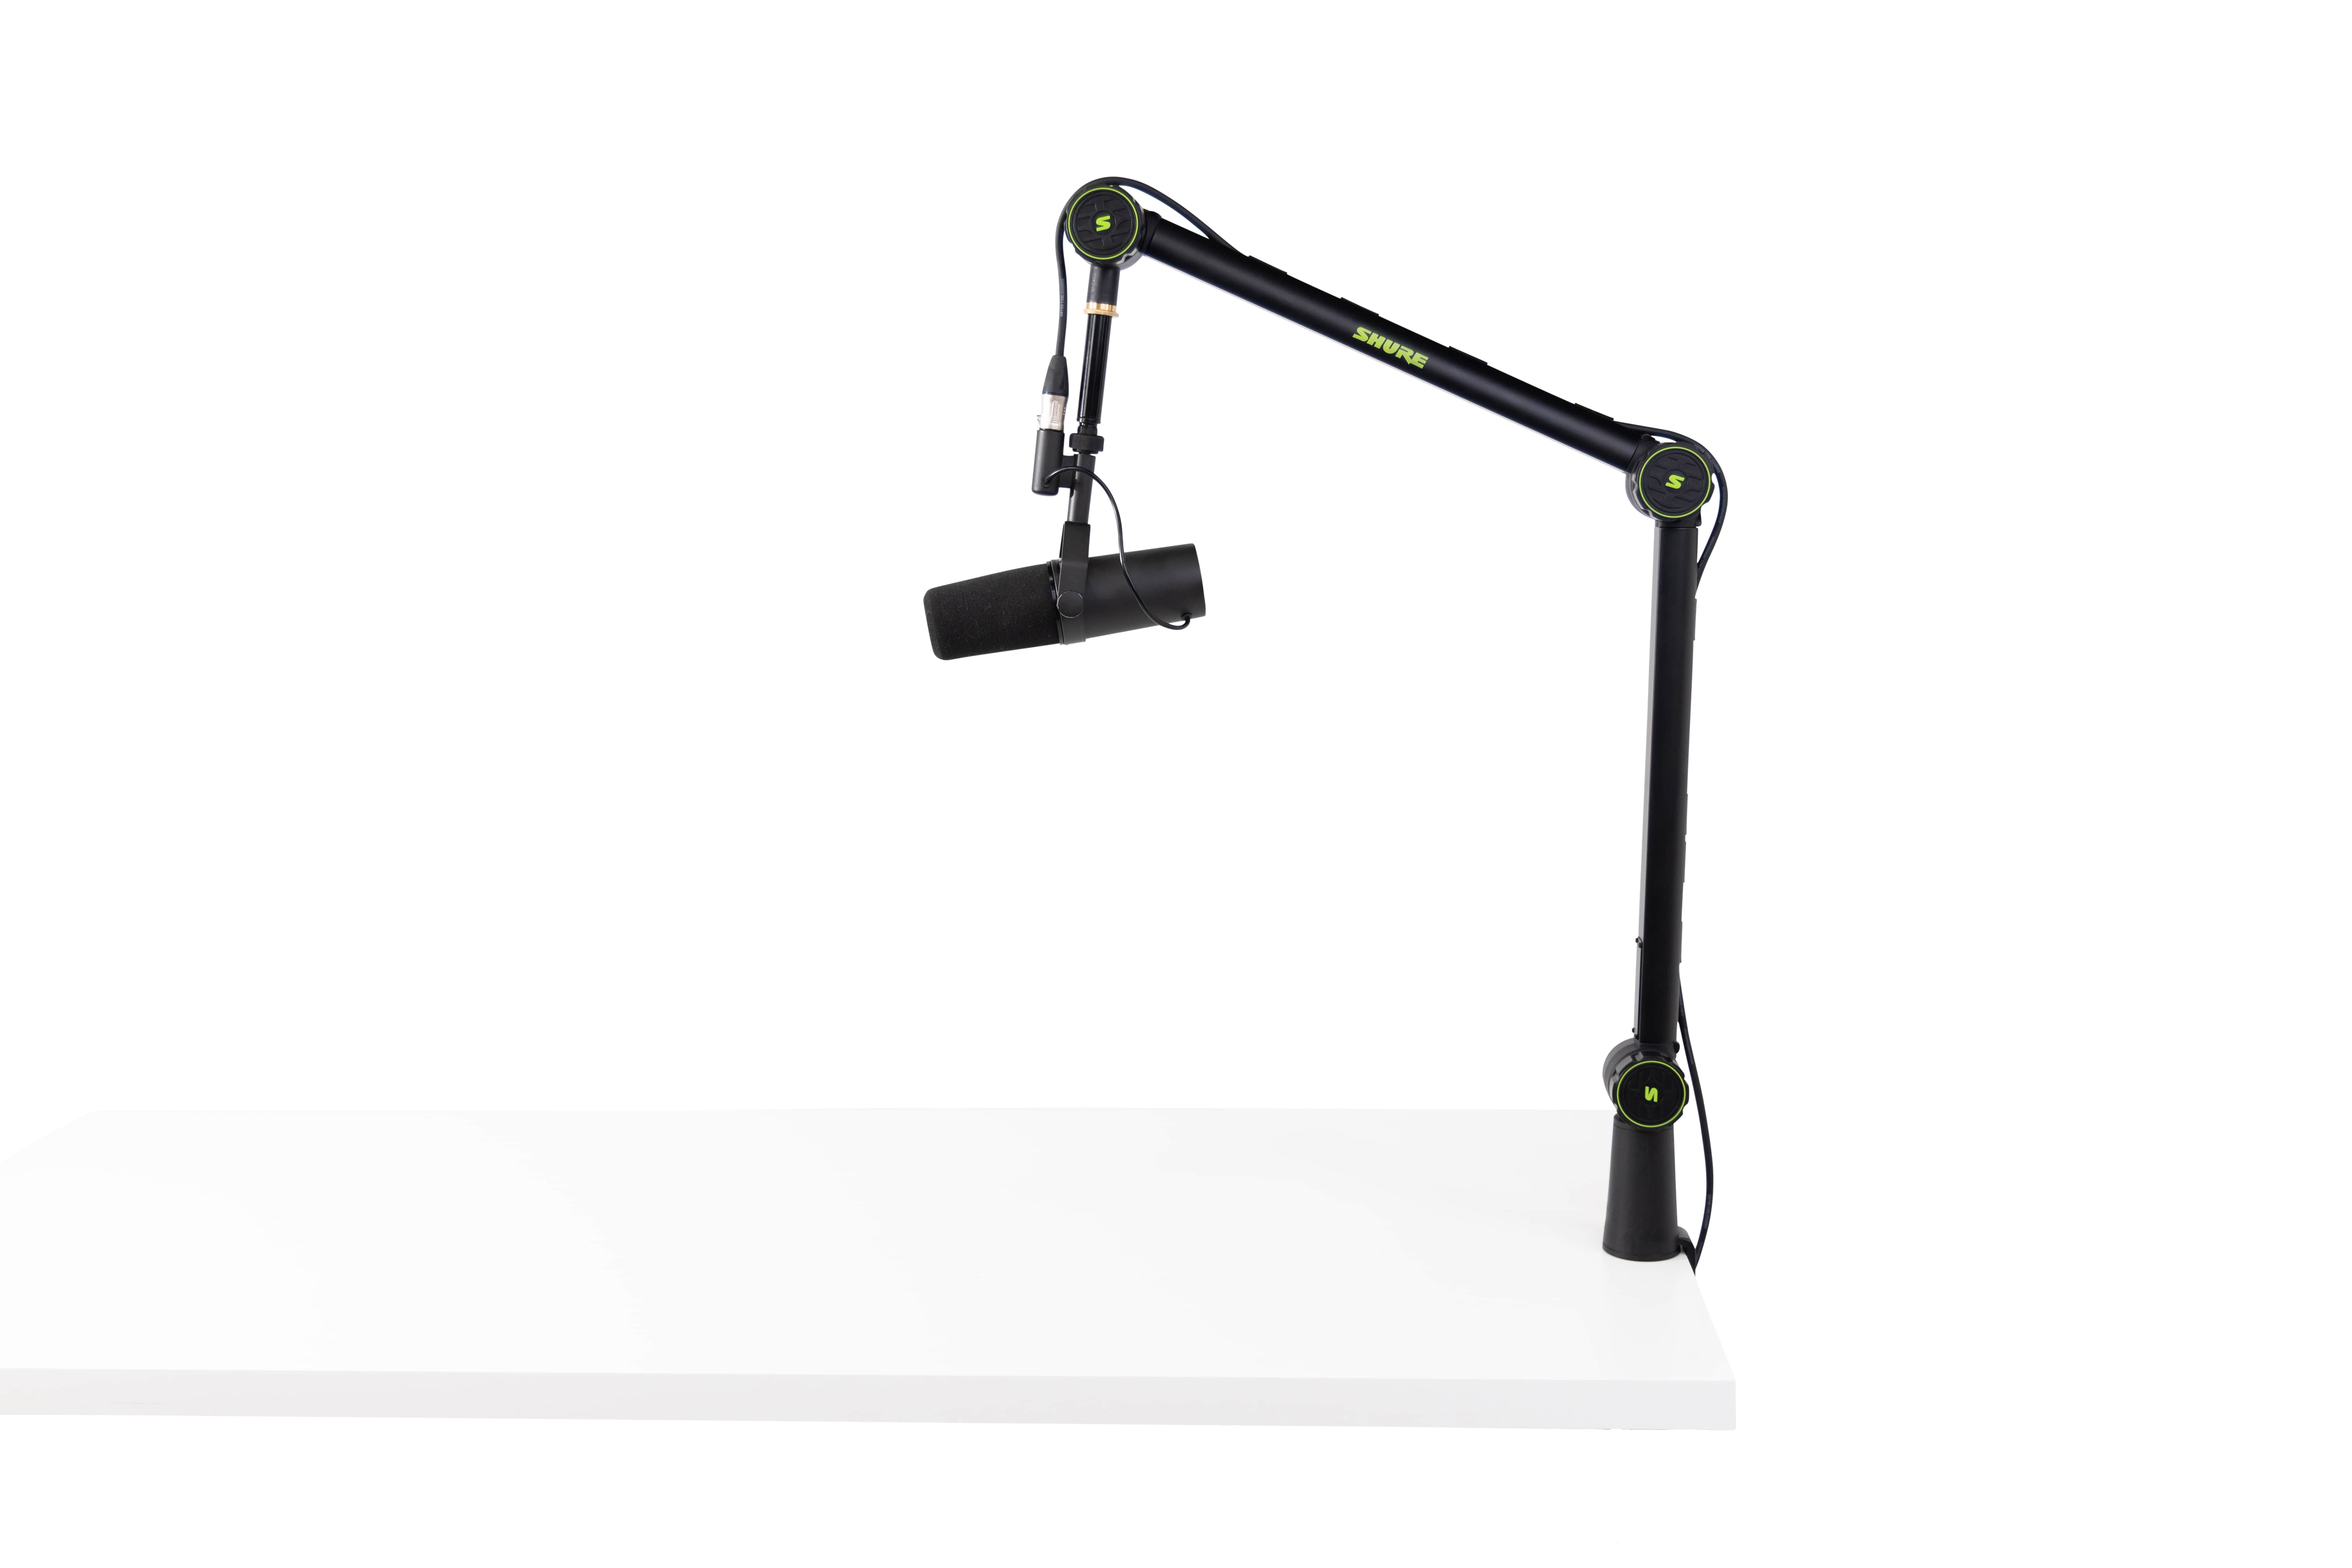 Gator Frameworks Bras Articule A Pince Deluxe Pour Micro - Microphone stand - Variation 1